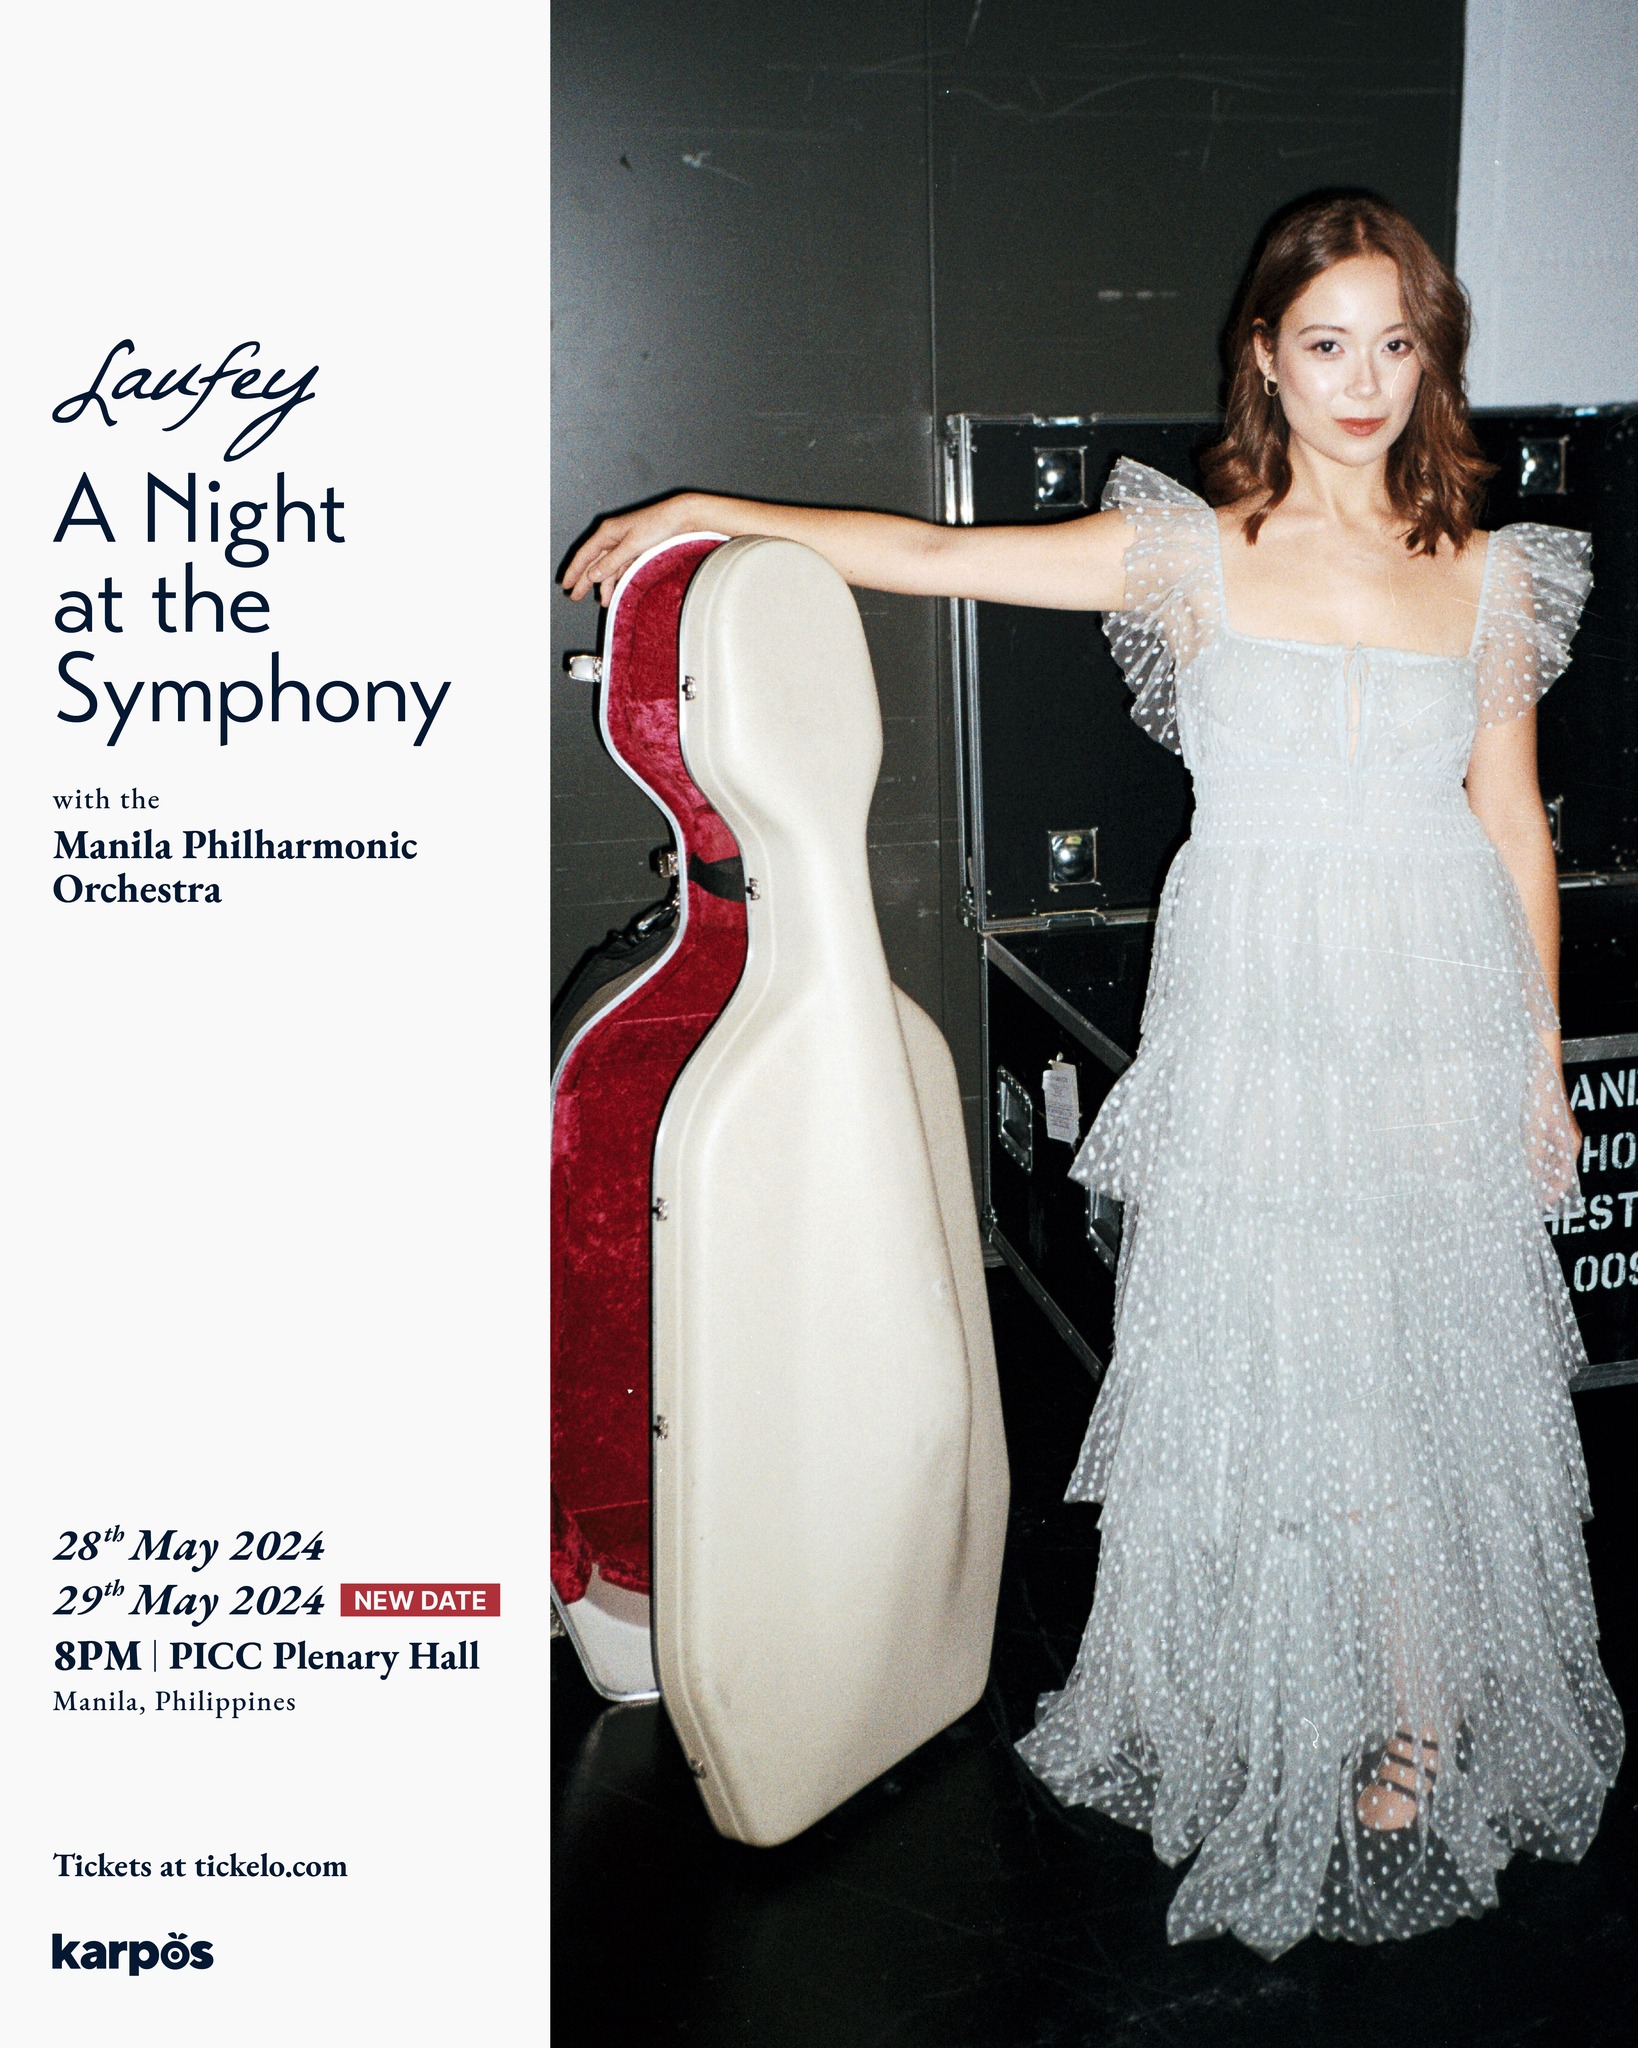 upcoming concerts philippines 2024 - laufey a night at the symphony in manila